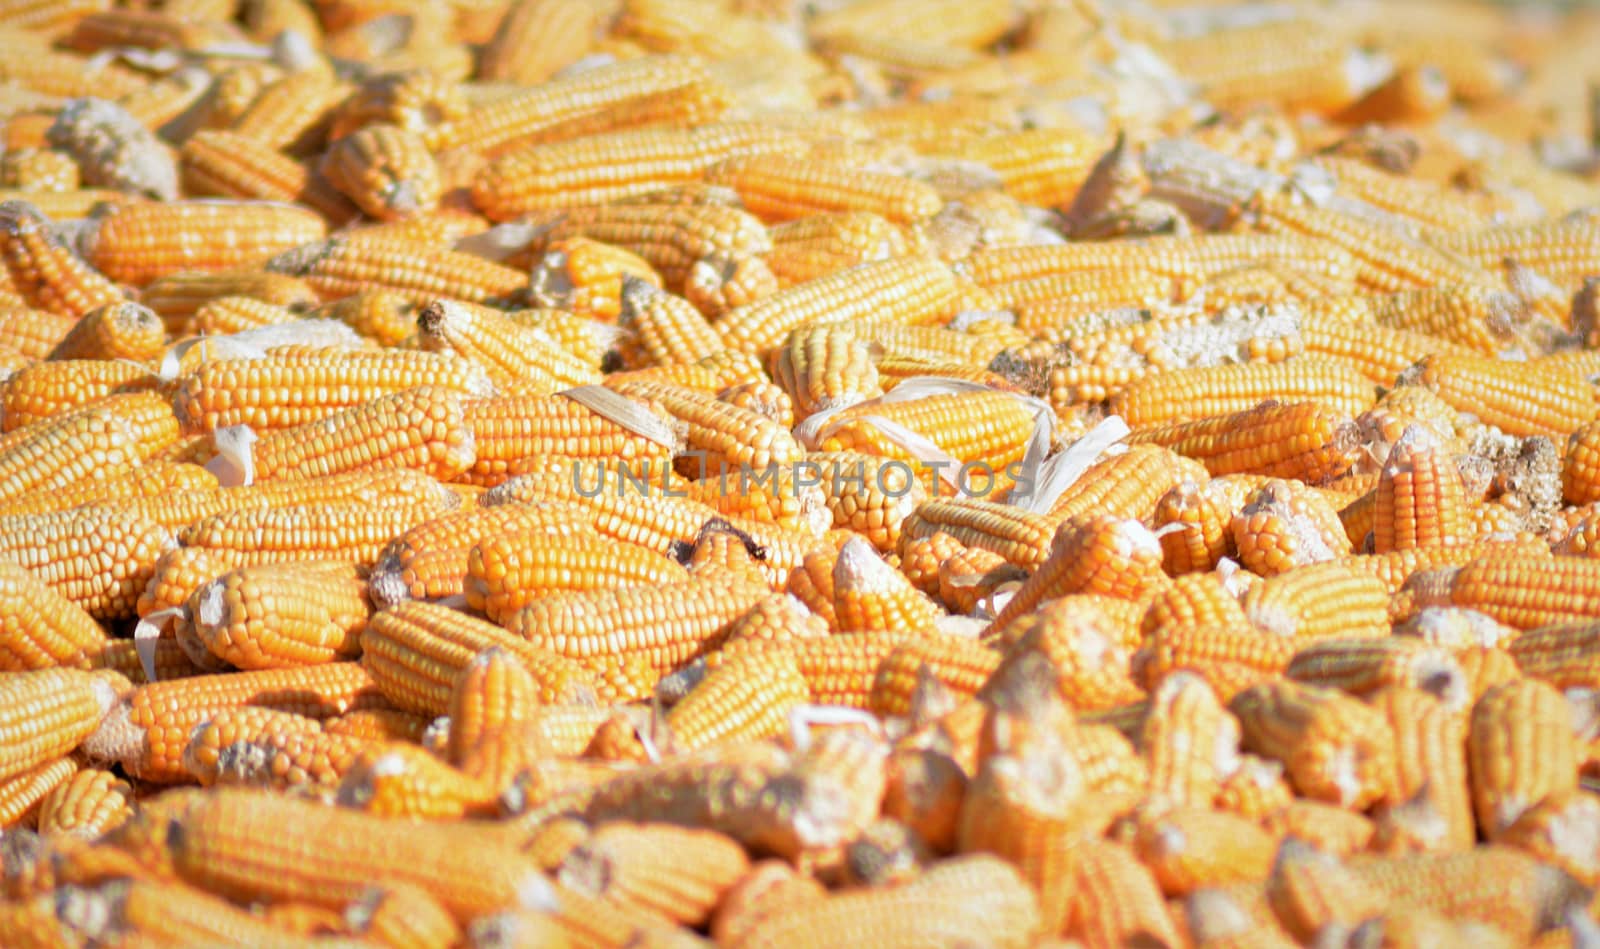 Corn on the cob is a culinary term used for a cooked ear of freshly picked maize from a cultivar of sweet corn. Sweet corn is the most common variety of maize eaten directly off the cob.